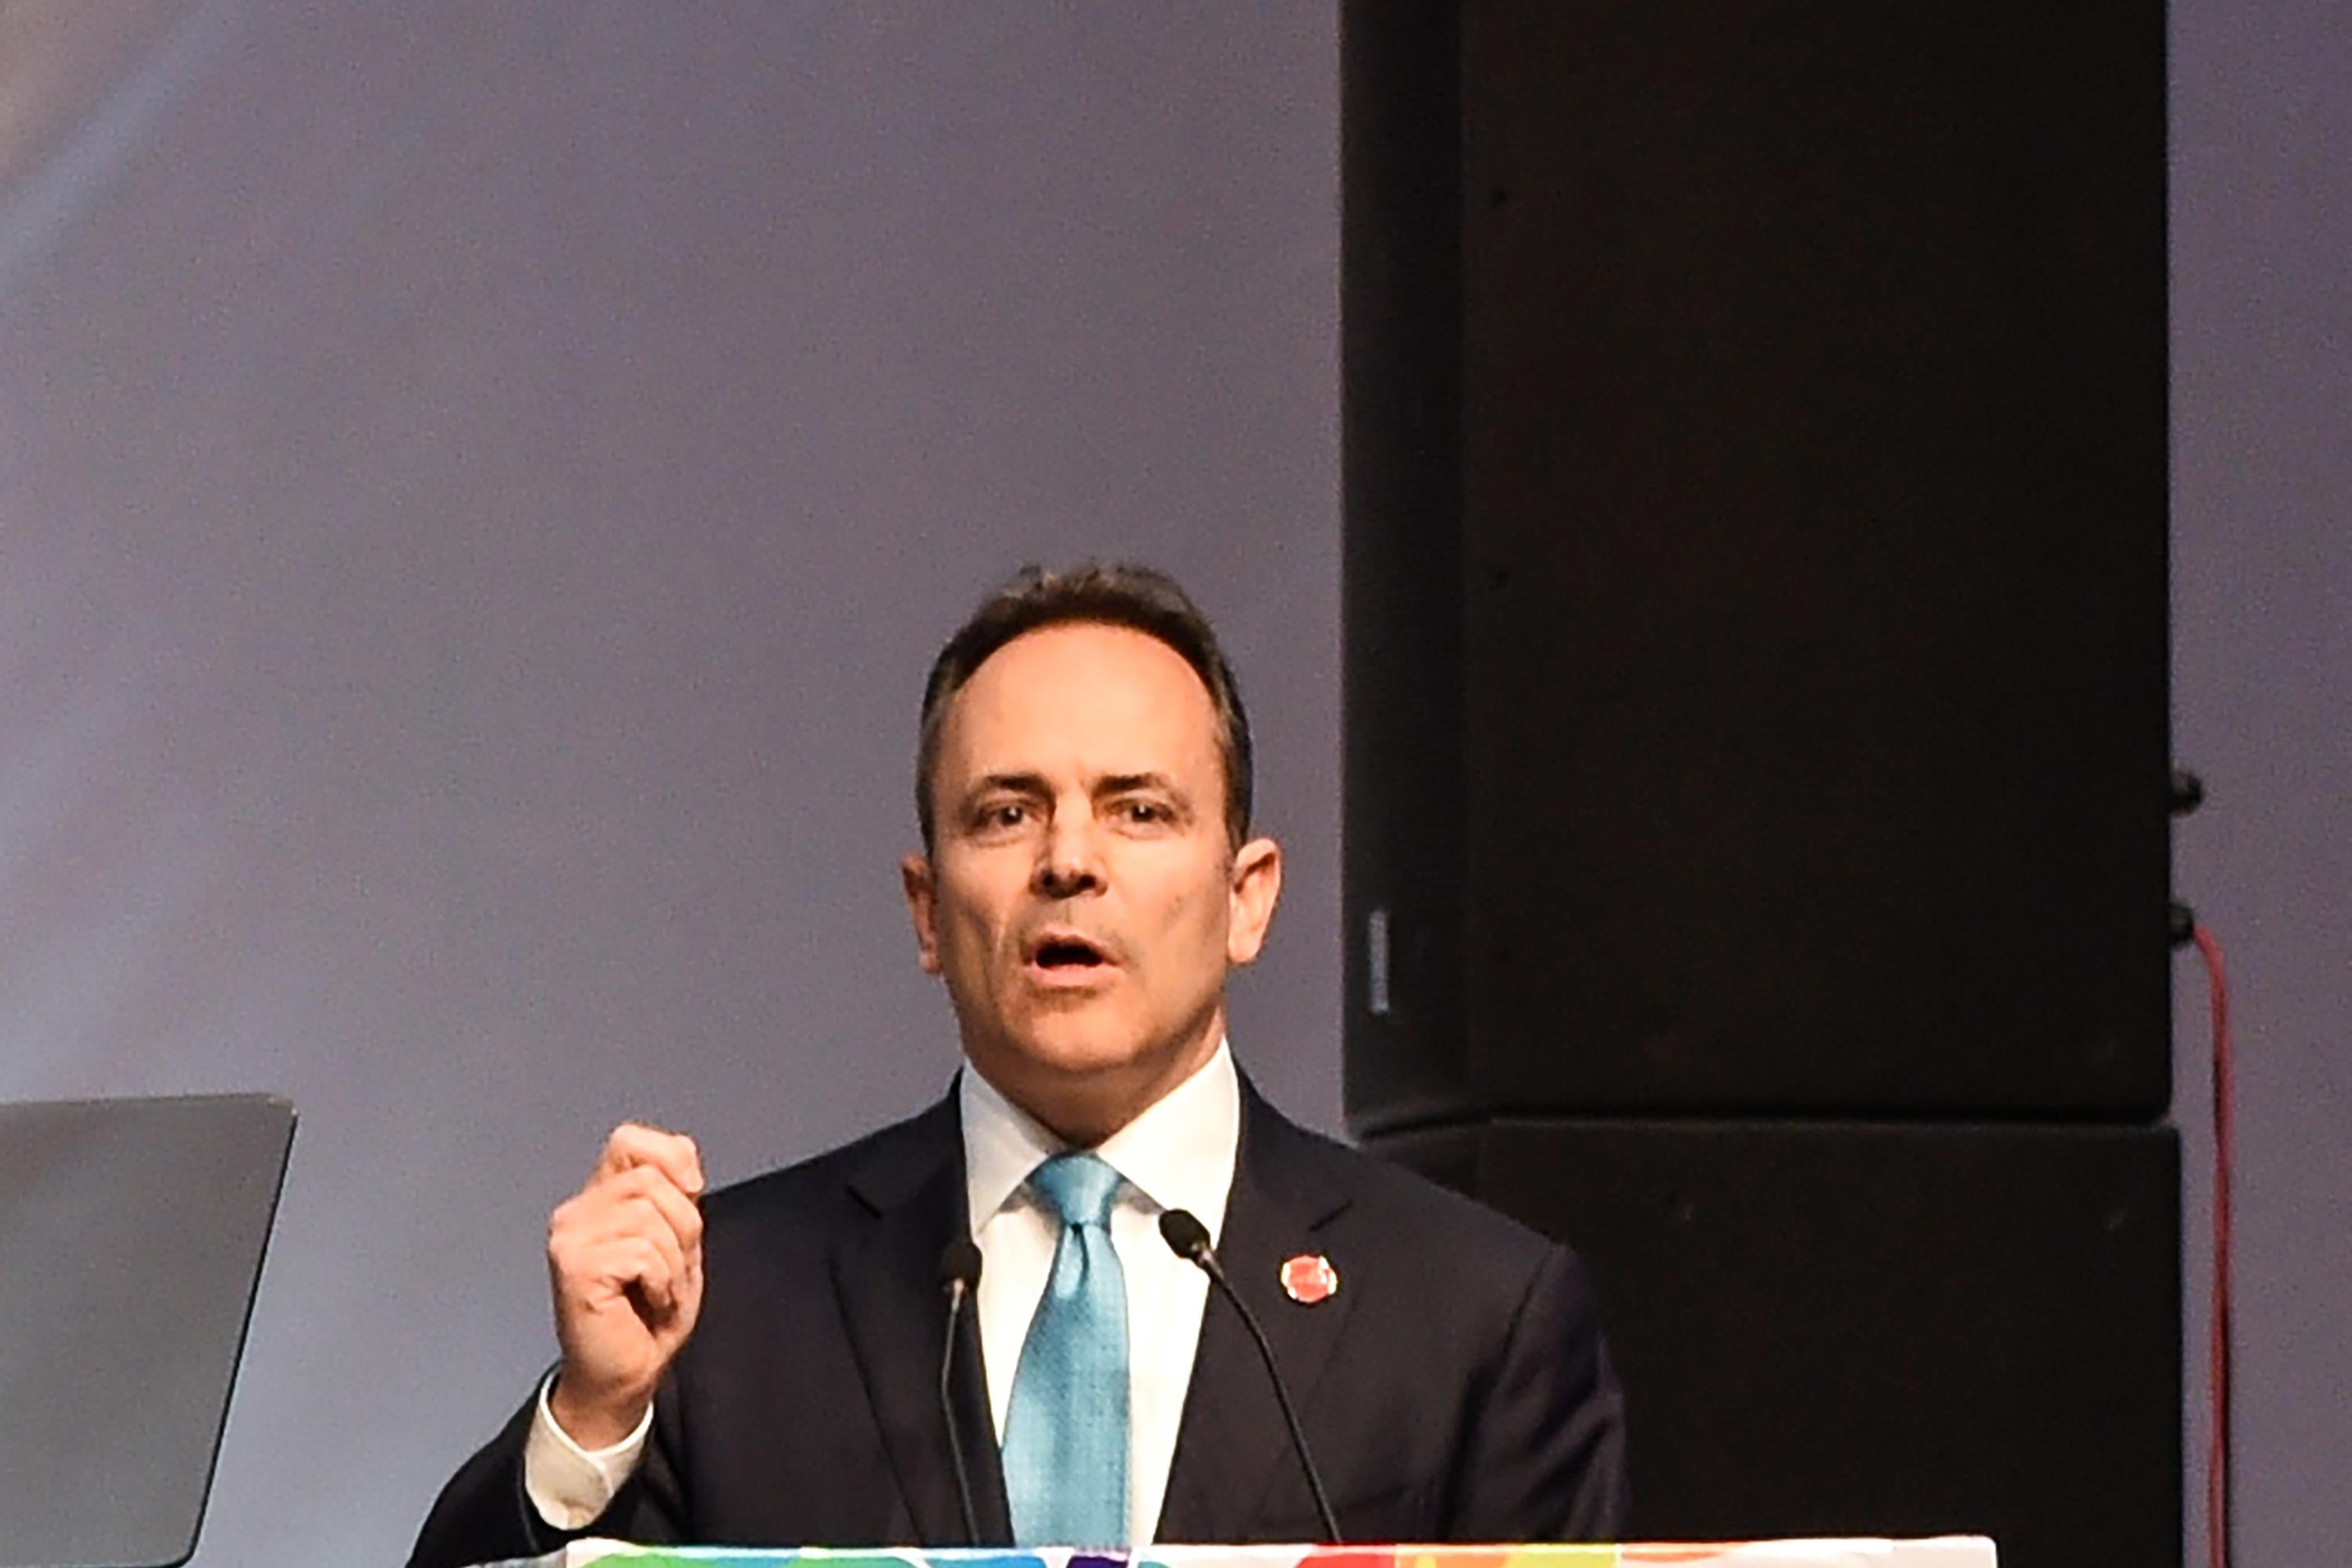 Bevin speaks at a colorful podium.